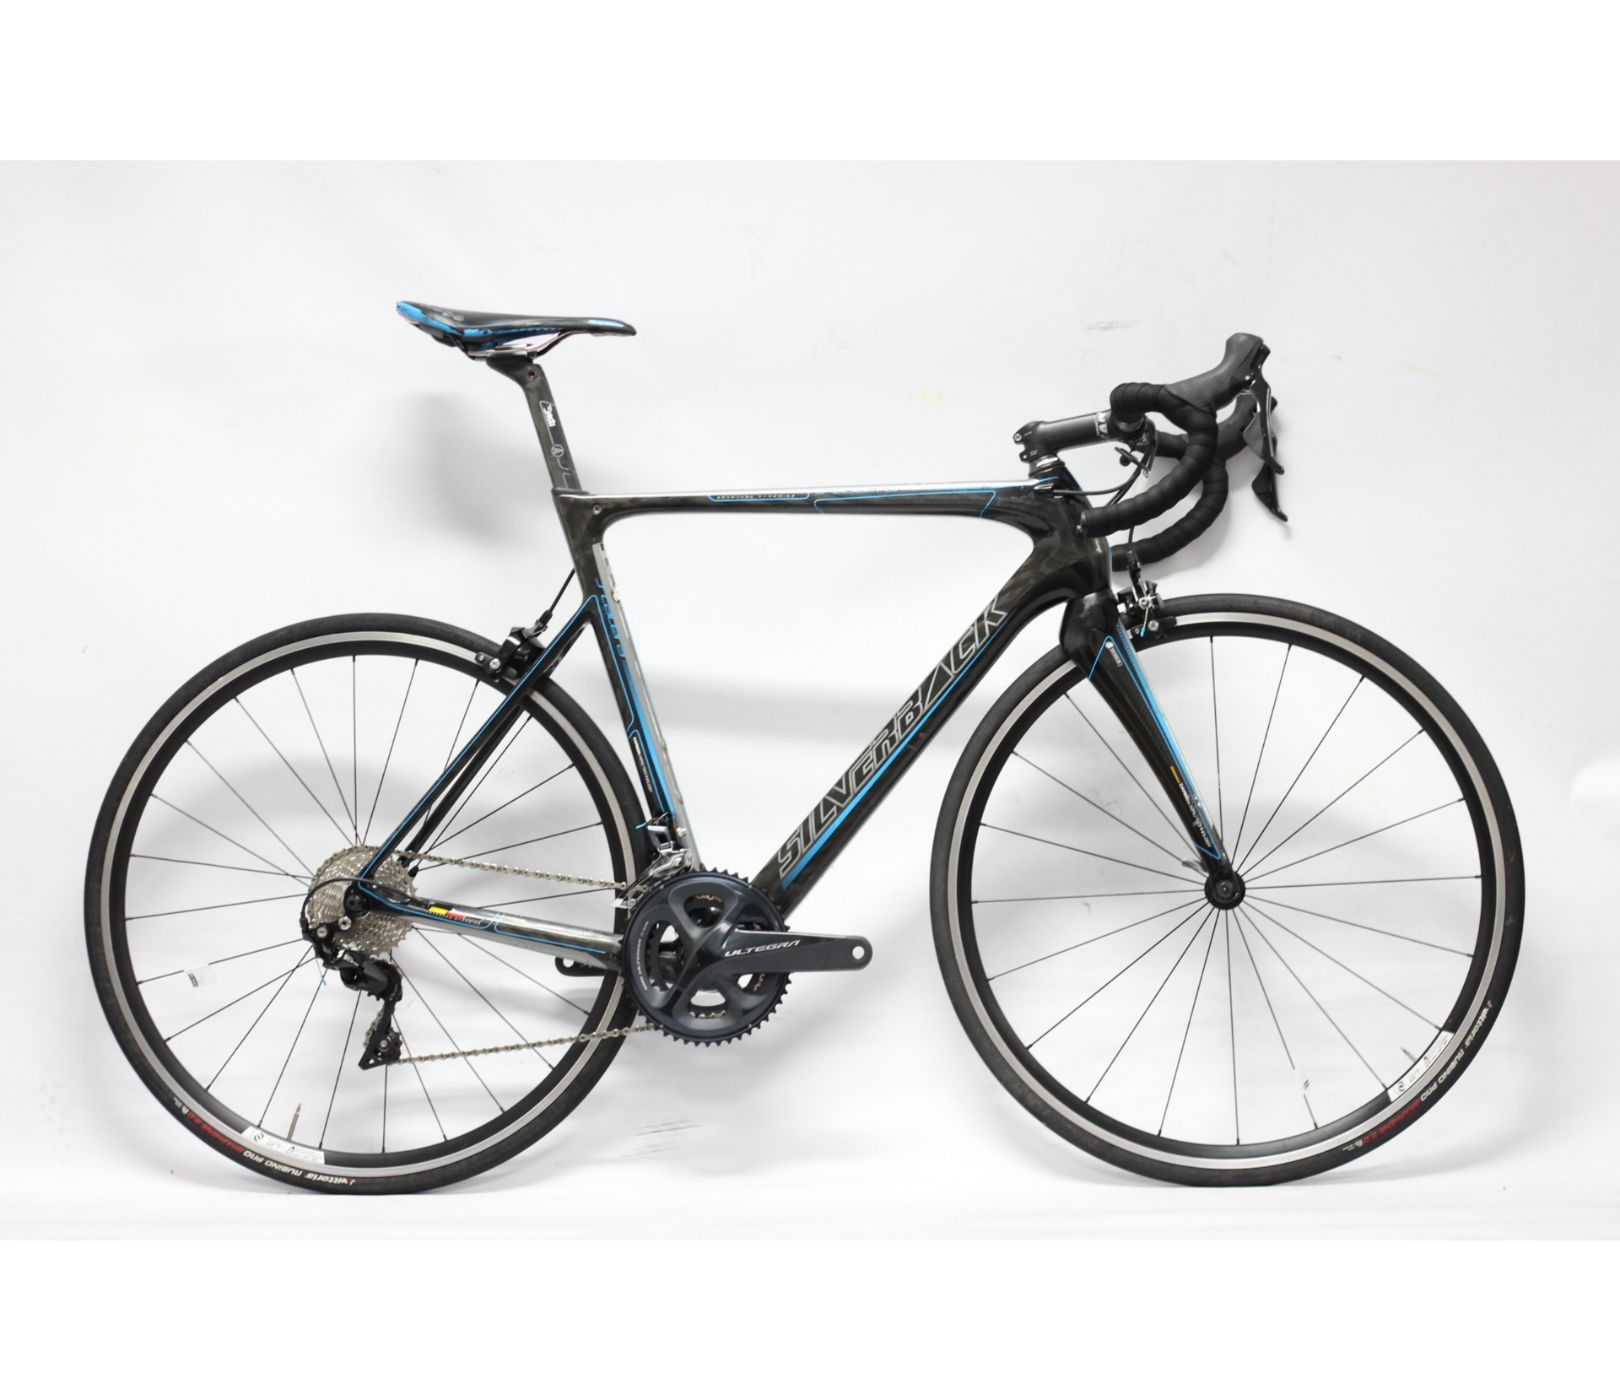 Pre-Owned Silverback Scalera Carbon Road Bike - 56 Large 